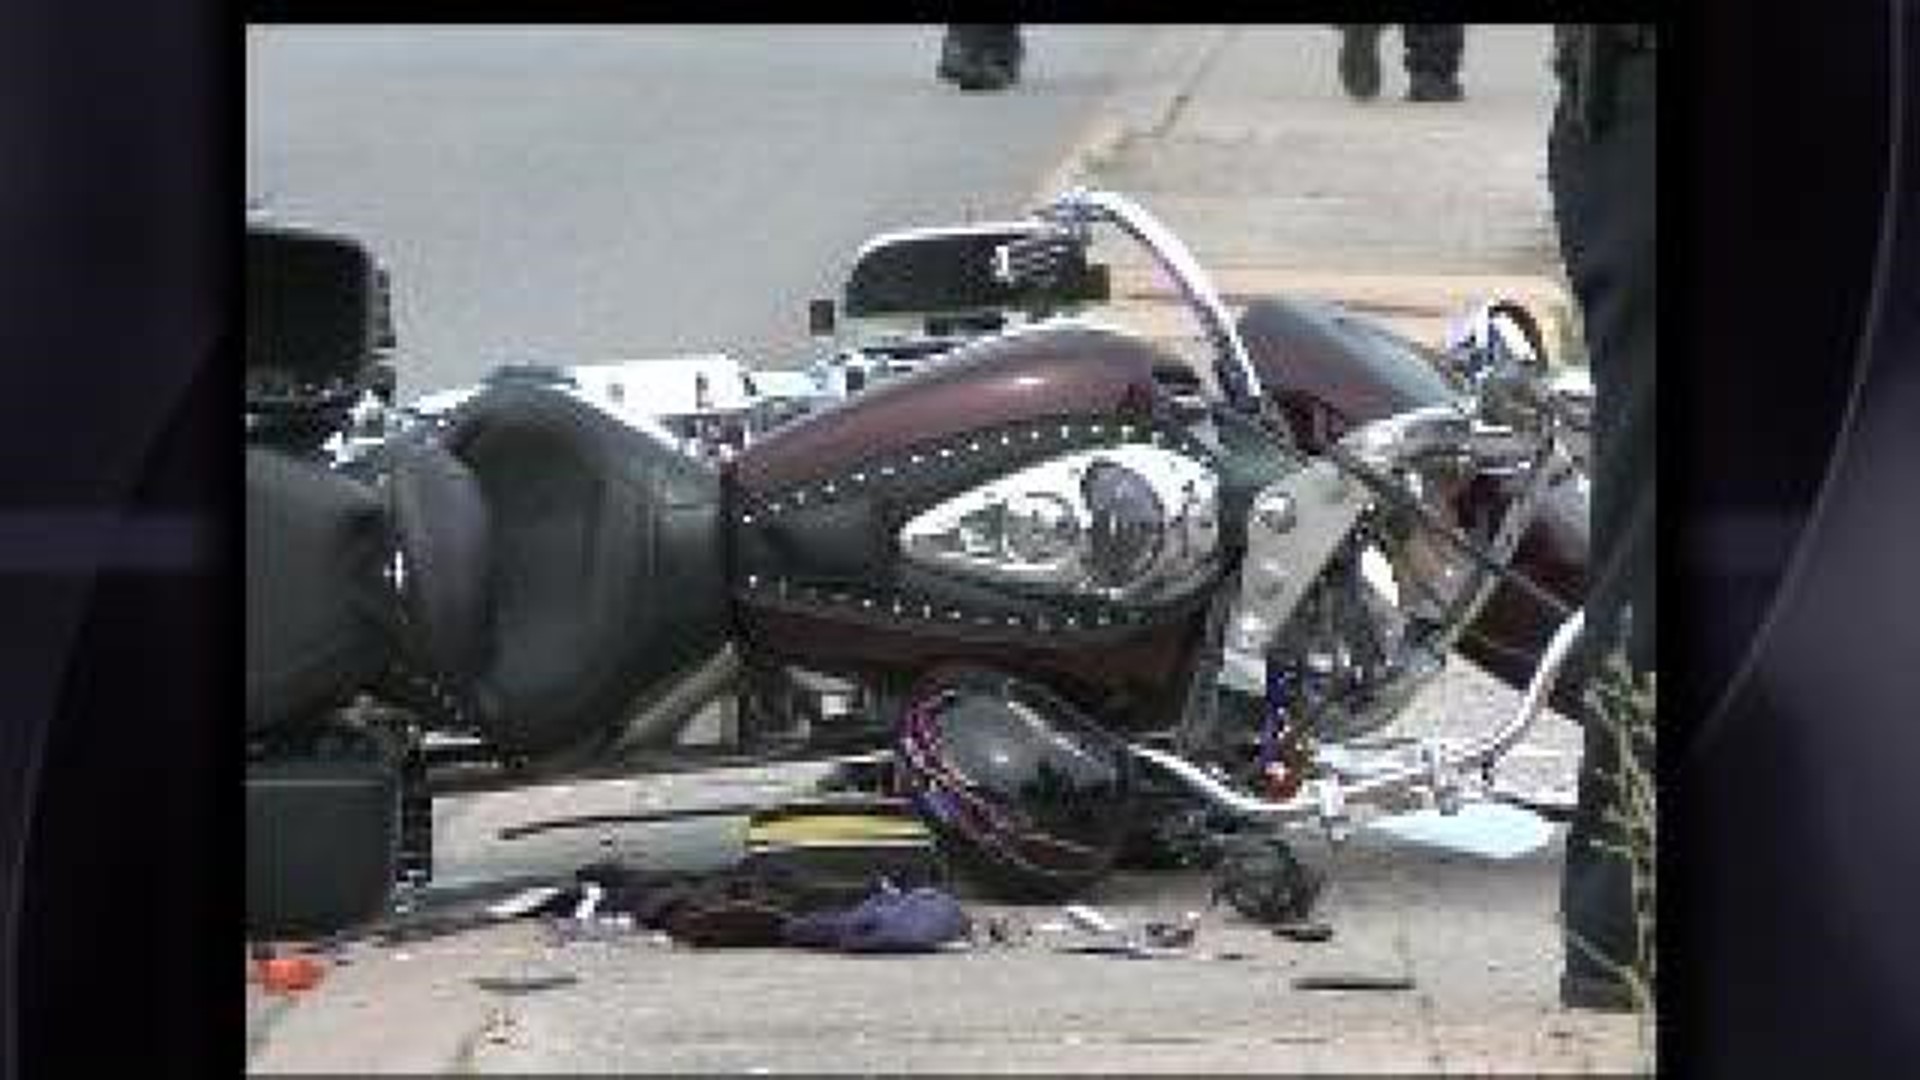 Deadly Motorcycle Accident